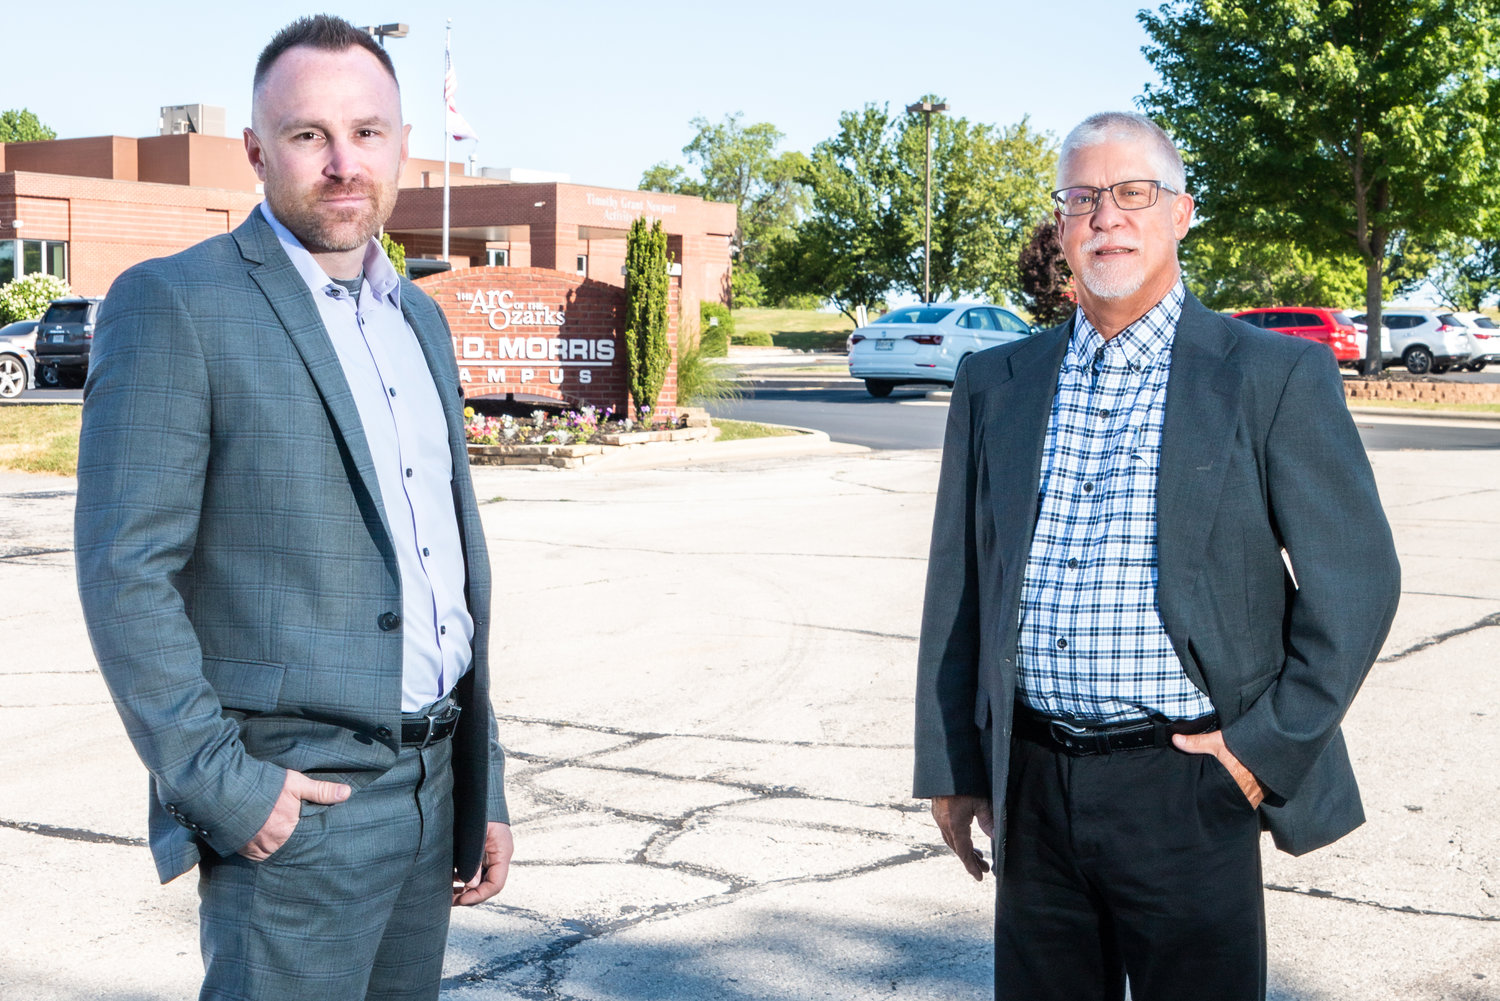 Tim Dygon and Michael Powers lead The Arc of the Ozarks, which recently acquired TheraCare Outpatient Services.